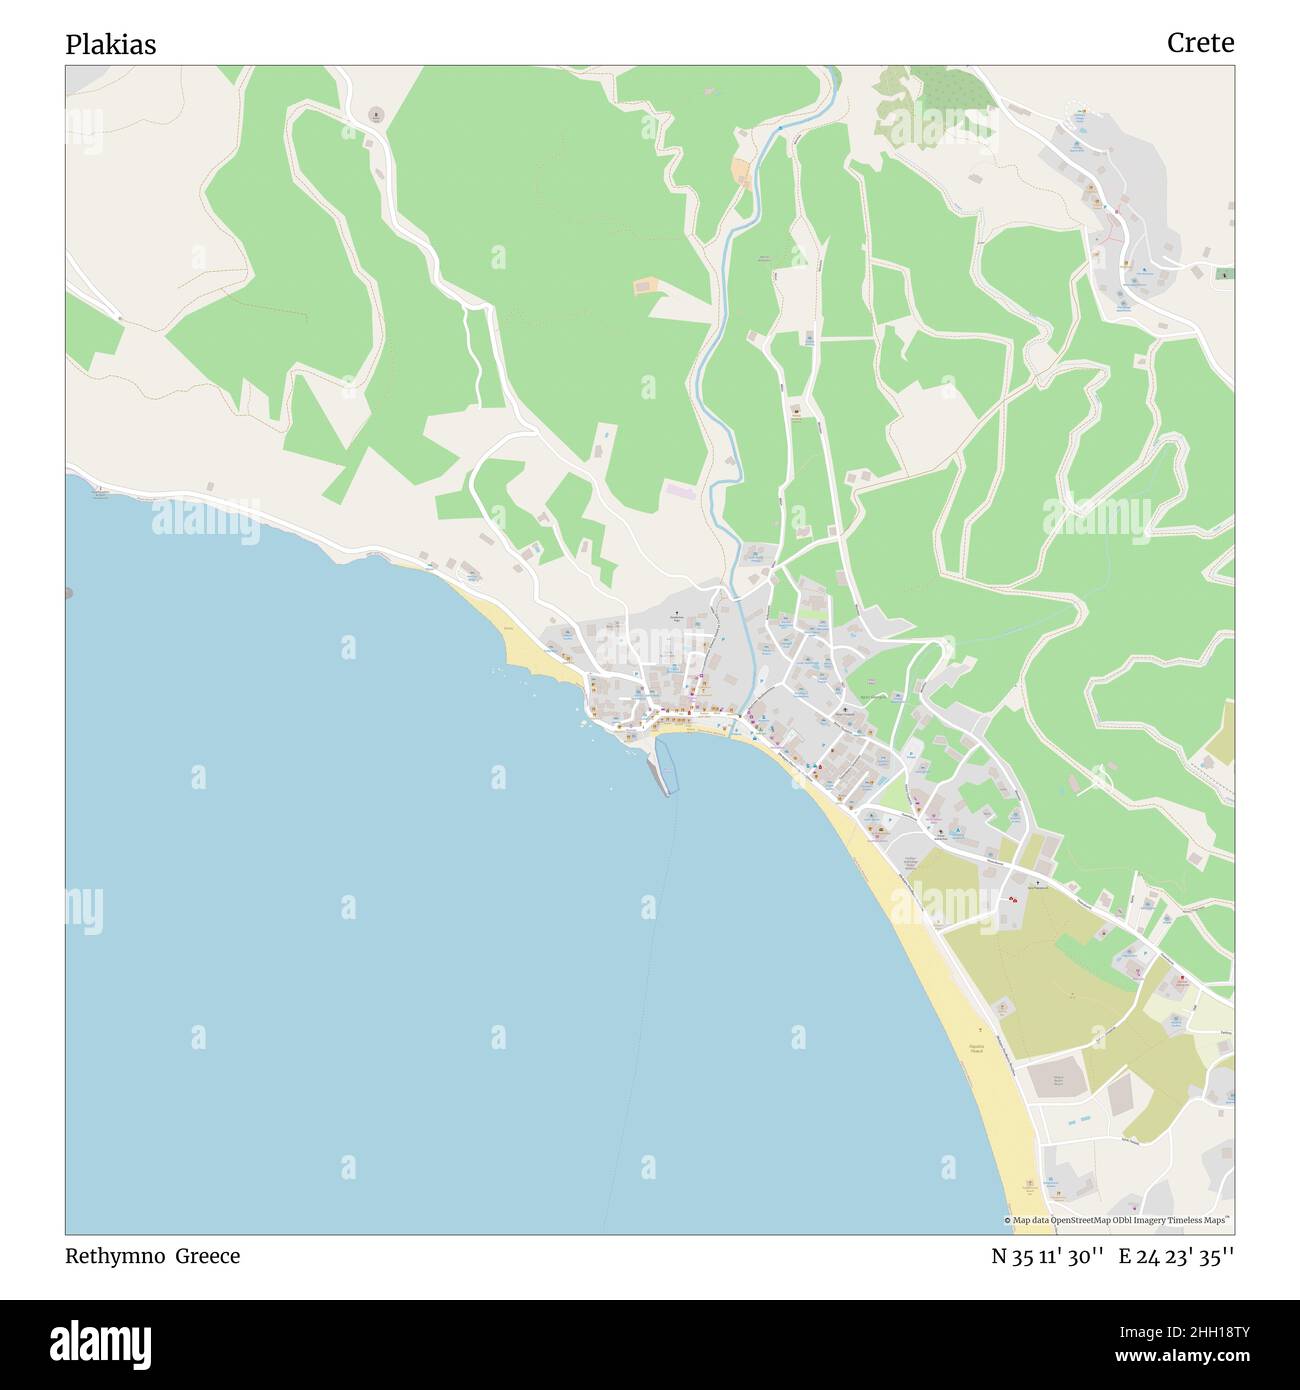 Plakias, Rethymno, Greece, Crete, N 35 11' 30'', E 24 23' 35'', map, Timeless Map published in 2021. Travelers, explorers and adventurers like Florence Nightingale, David Livingstone, Ernest Shackleton, Lewis and Clark and Sherlock Holmes relied on maps to plan travels to the world's most remote corners, Timeless Maps is mapping most locations on the globe, showing the achievement of great dreams Stock Photo